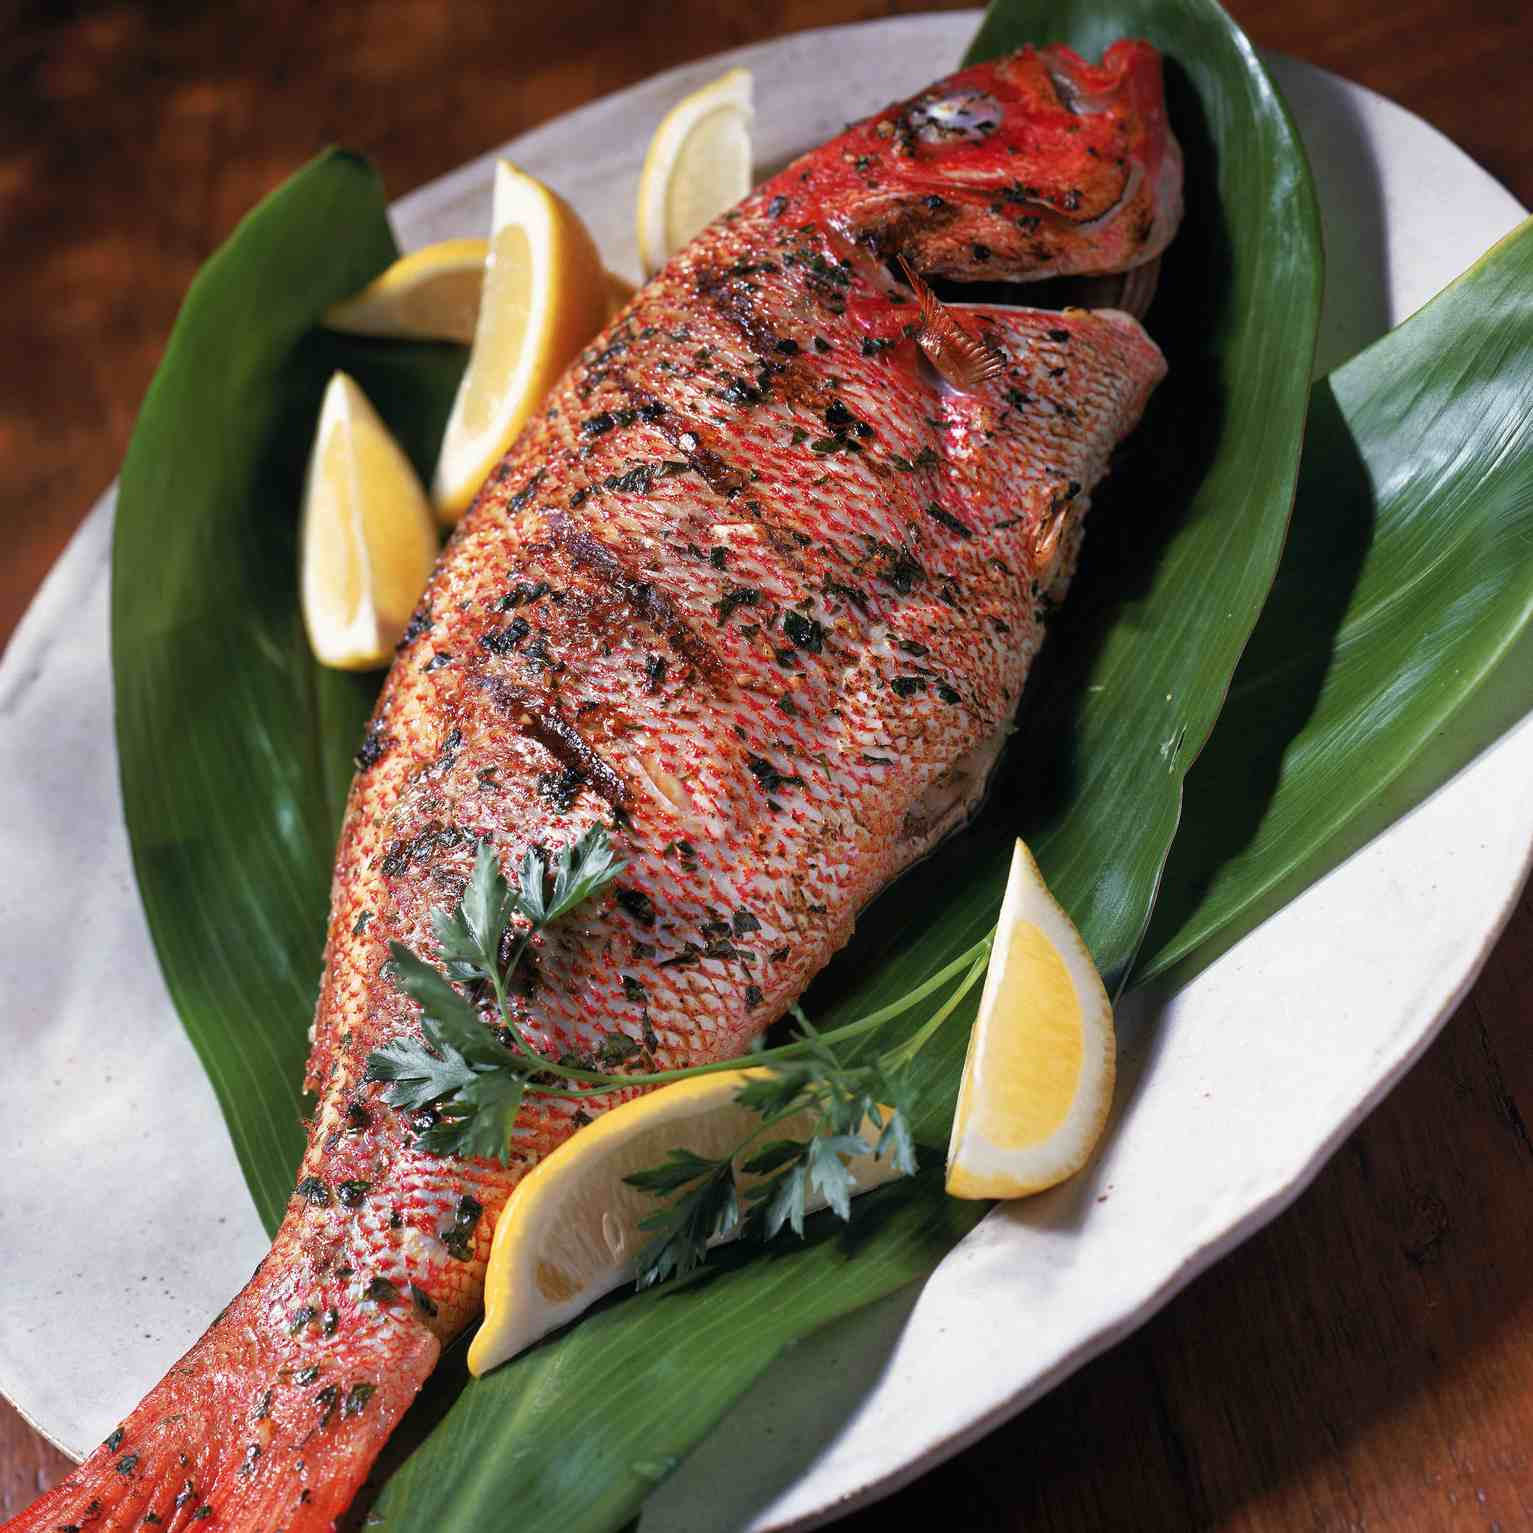 Recipes For Grilled Fish
 Top 28 Grilled Fish Recipes